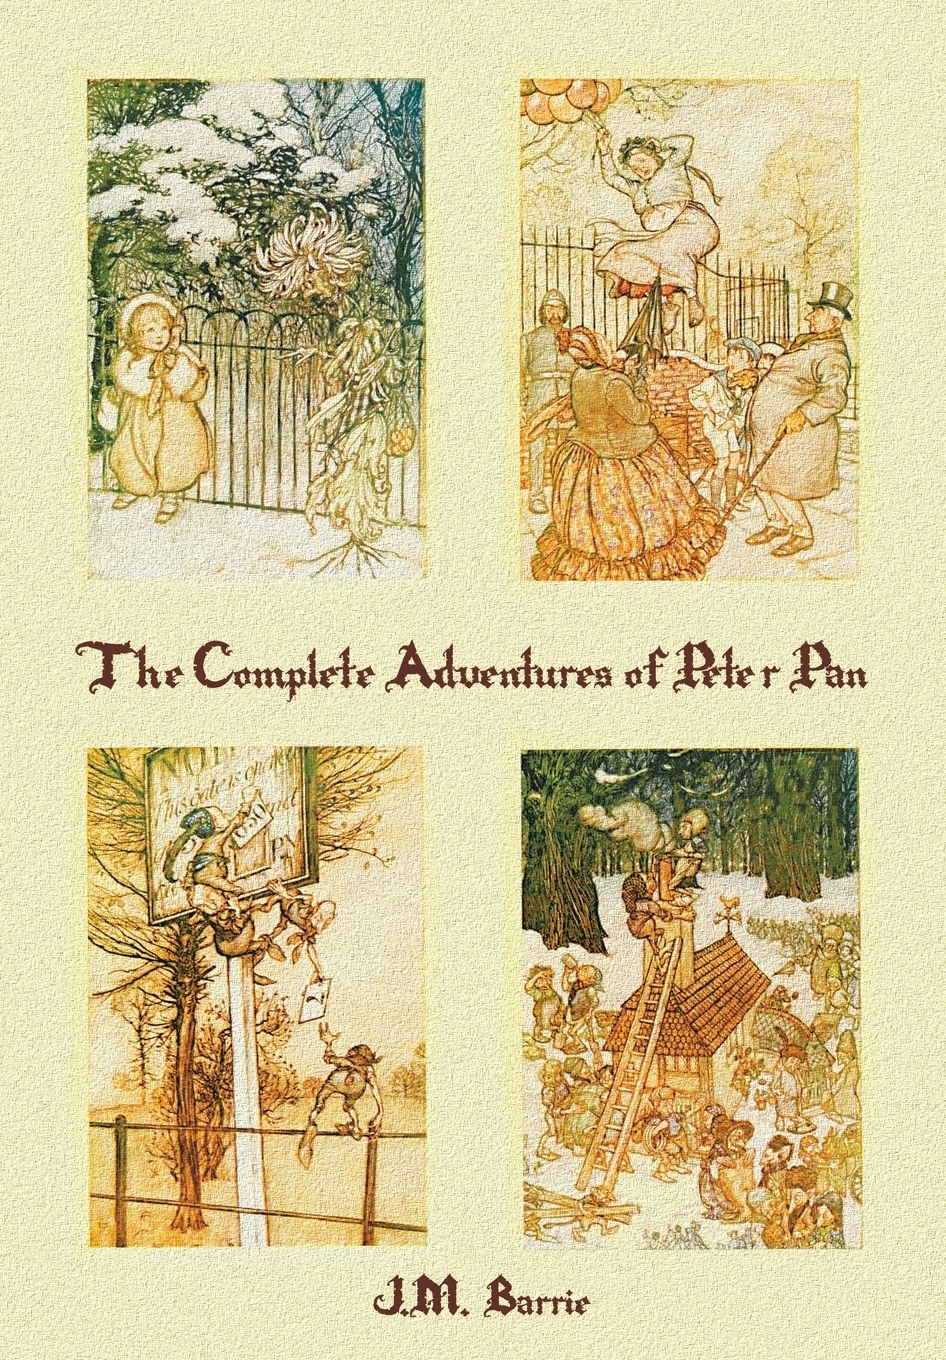 The Complete Adventures of Peter Pan (complete and unabridged) includes. The Little White Bird, Peter Pan in Kensington Gardens (illustrated) and Peter and Wendy(illustrated)